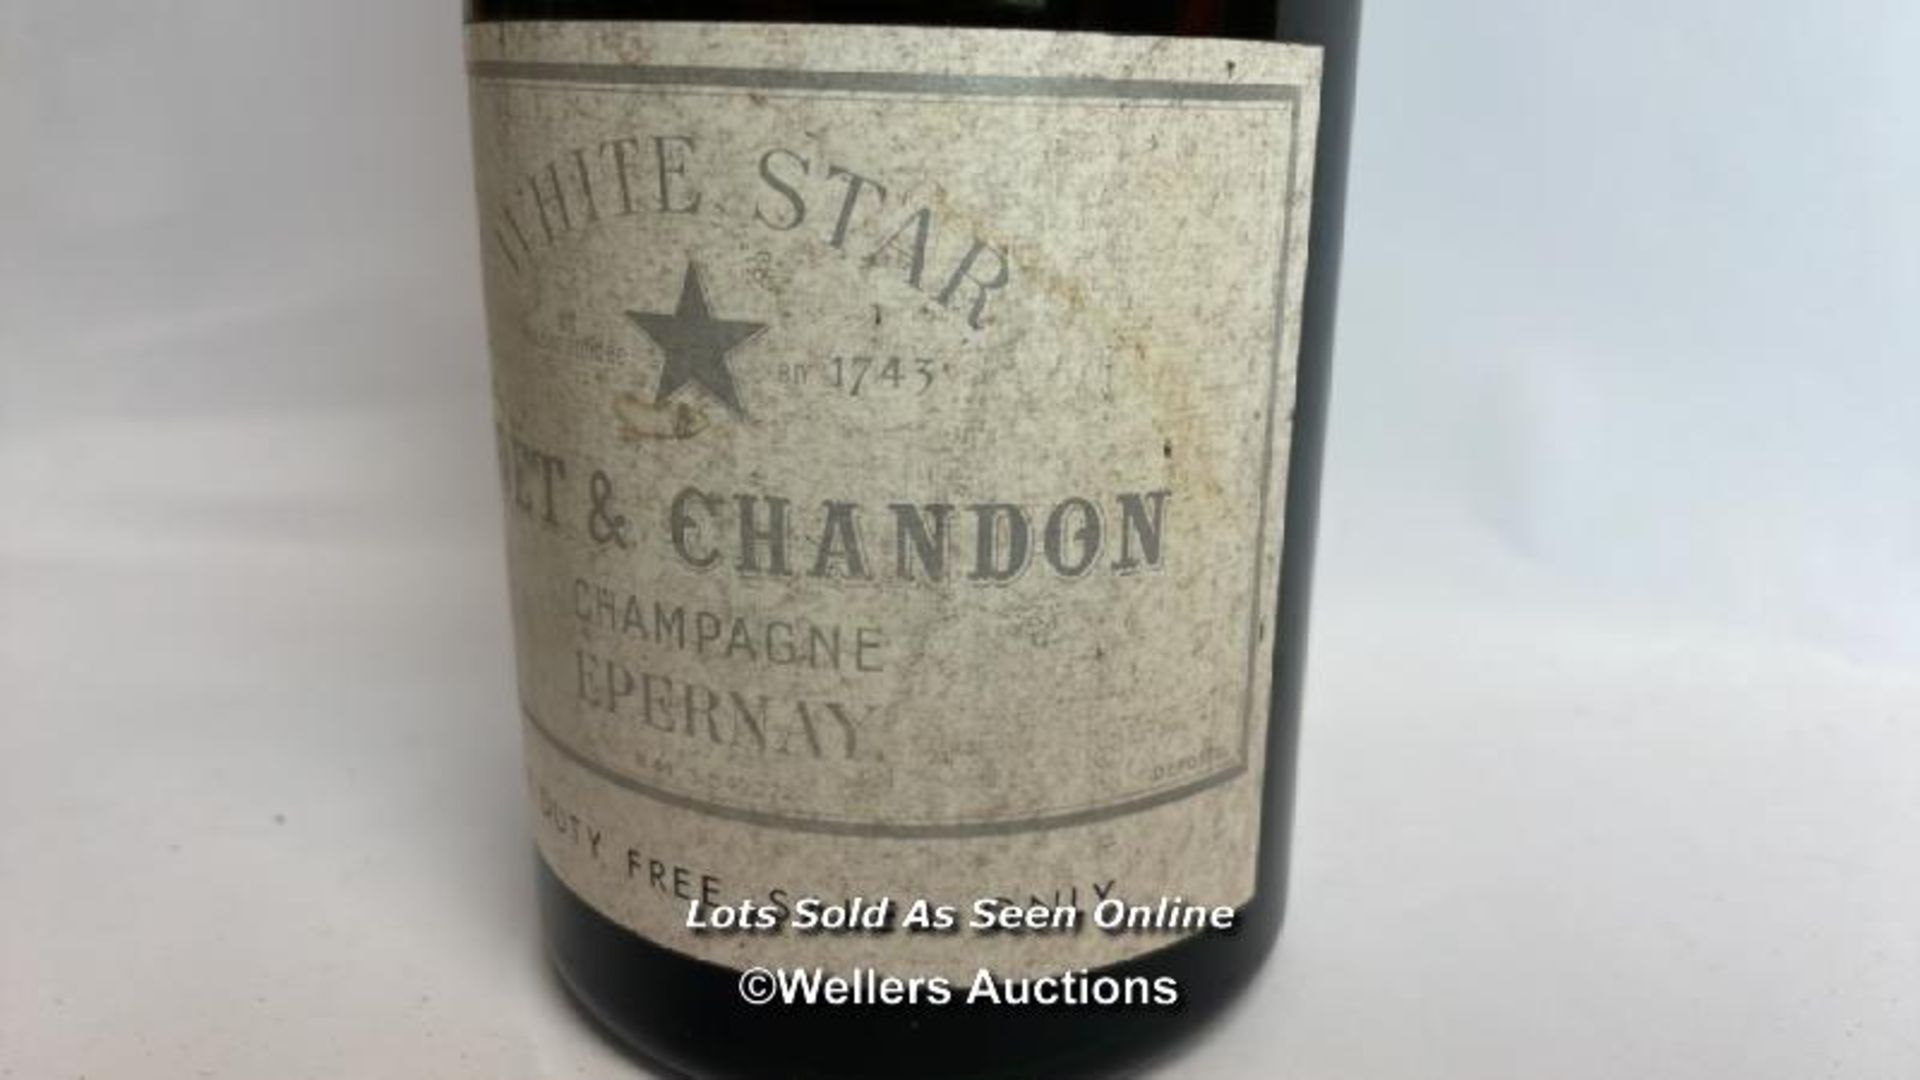 White Star Moet & Chandon Champagne Epernay, 75cl, NM3342272 / Please see images for fill level - Bild 4 aus 7